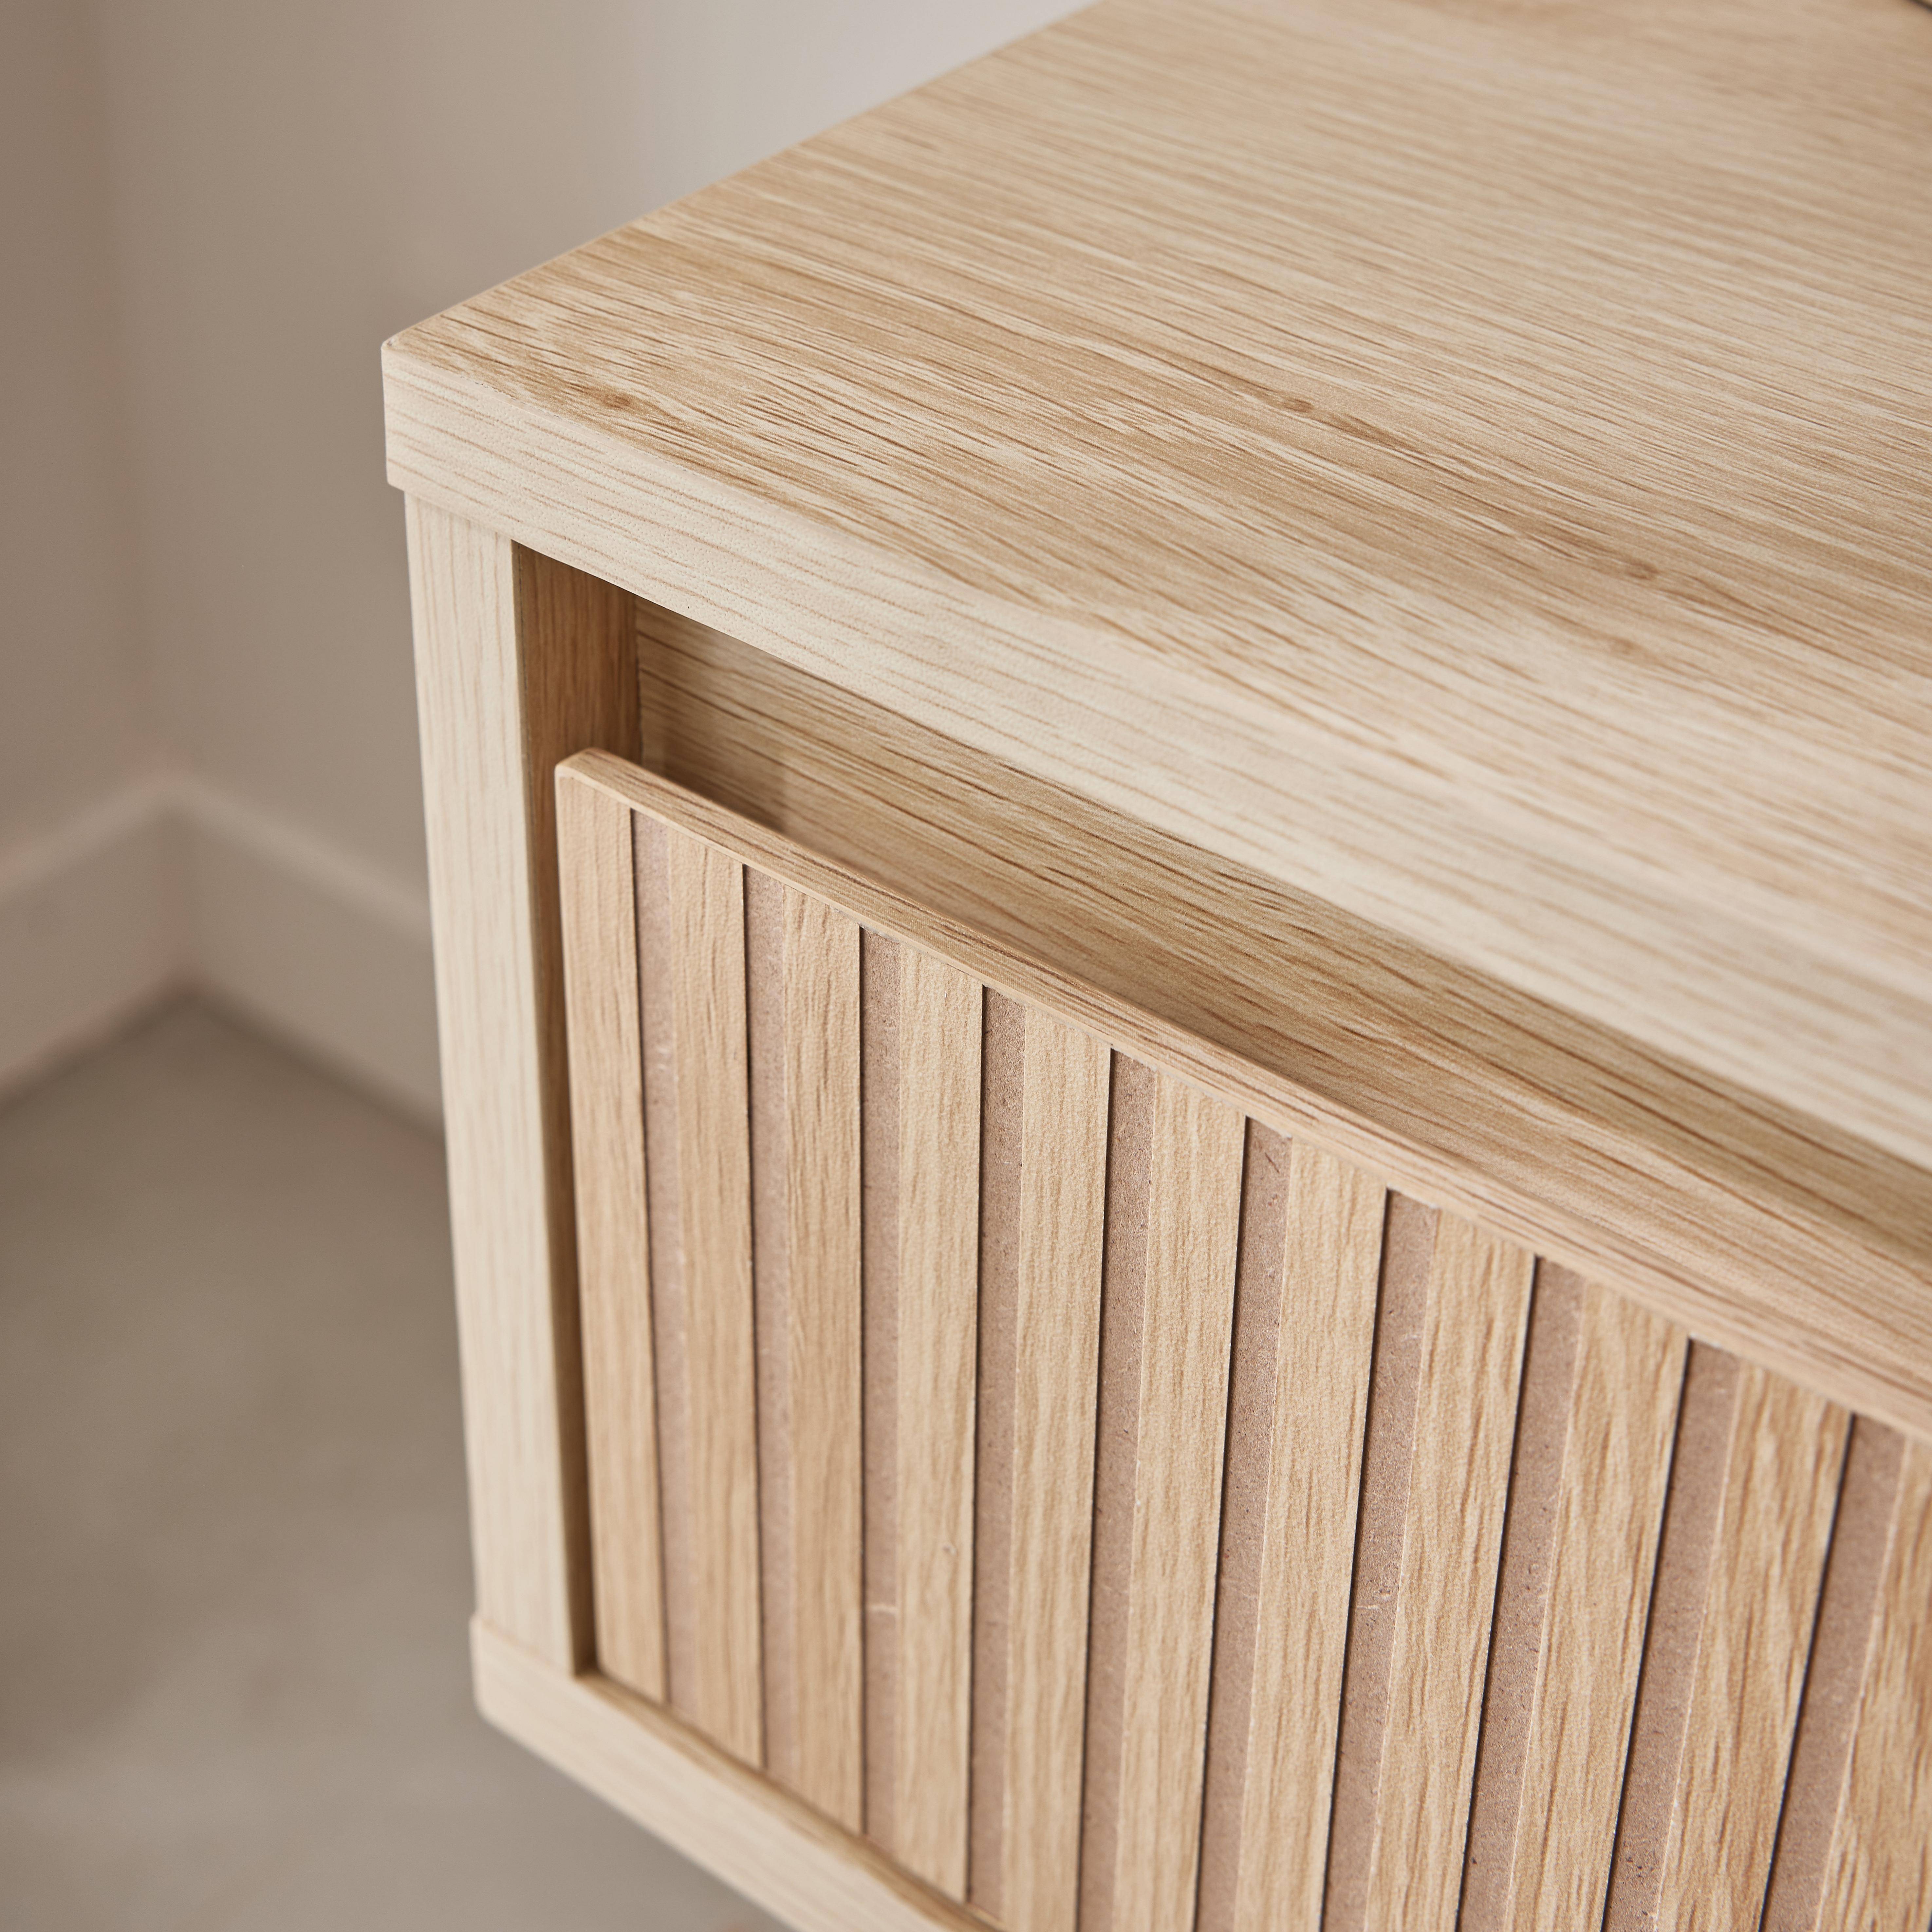 Bedside table with one drawer. Natural colour laminate panels. Fir wood legs.  W 39 x 39 x H 55.4cm LINEAR Photo3